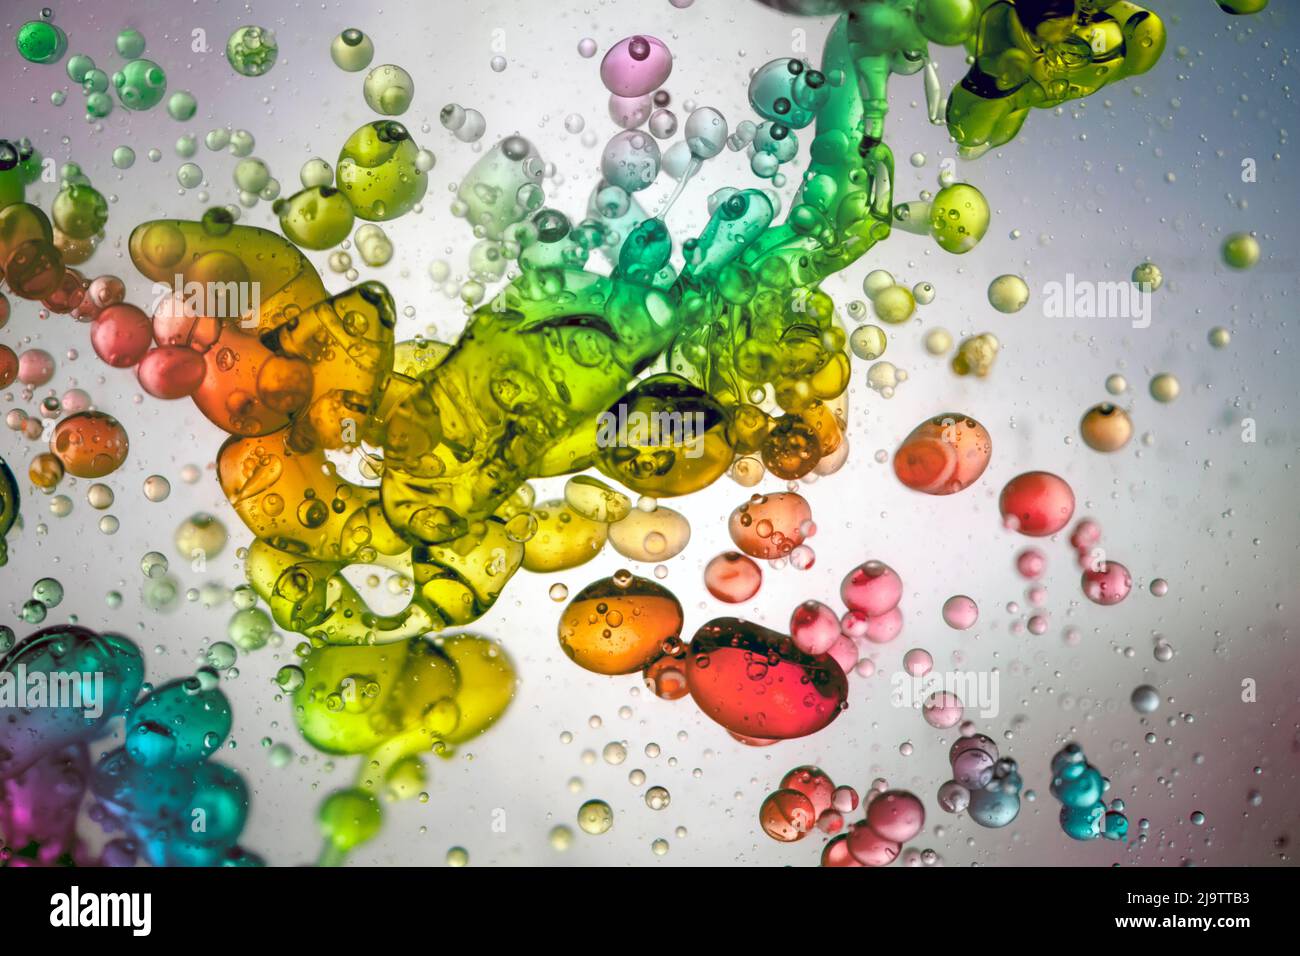 Large drops of water of many colors floating in transparent liquid Stock Photo